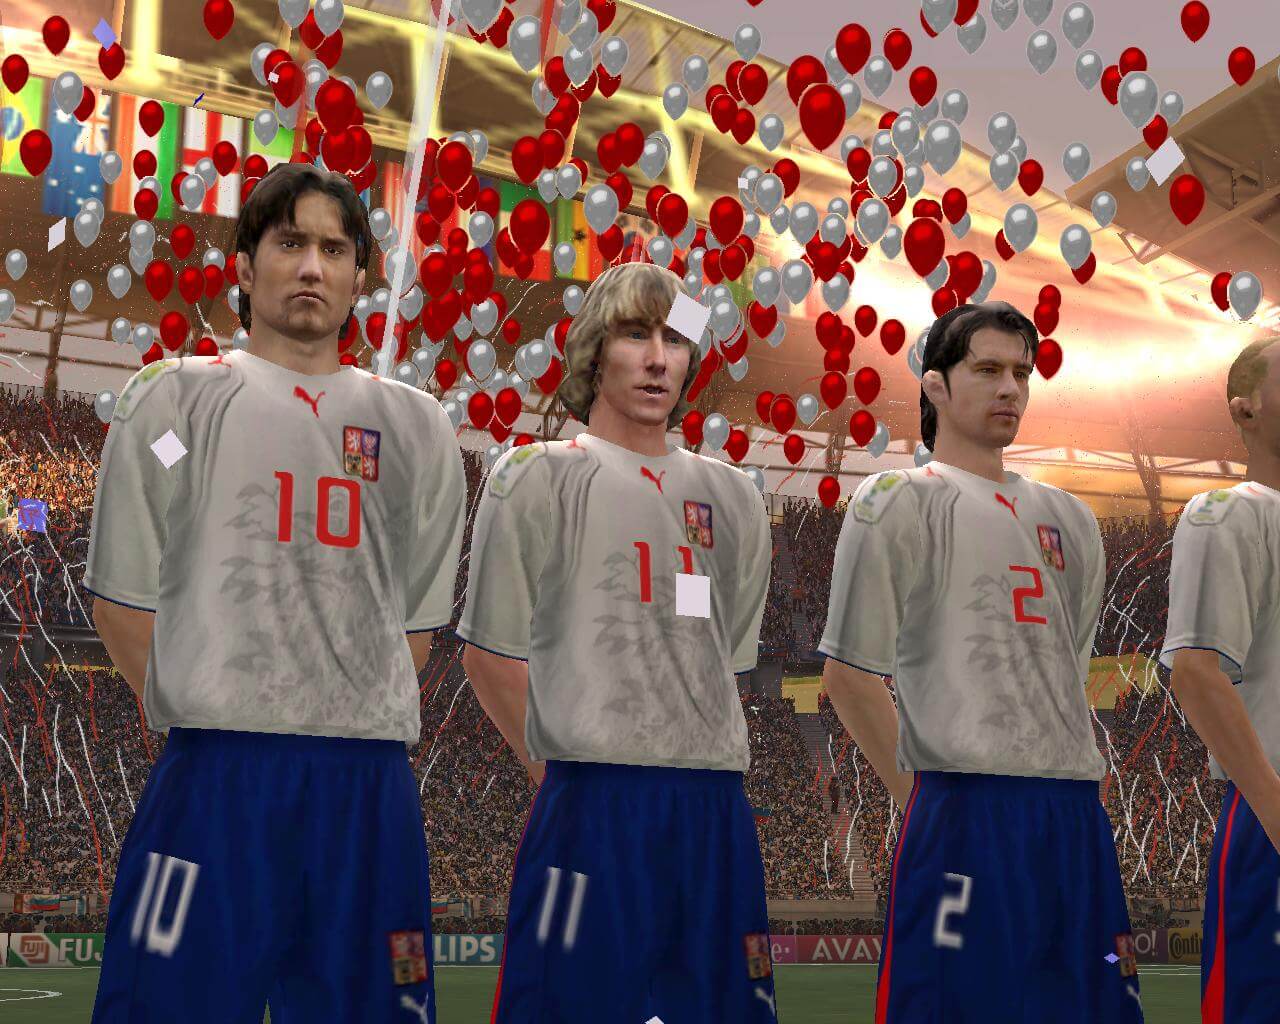 2006 FIFA World Cup (video game) - Wikipedia